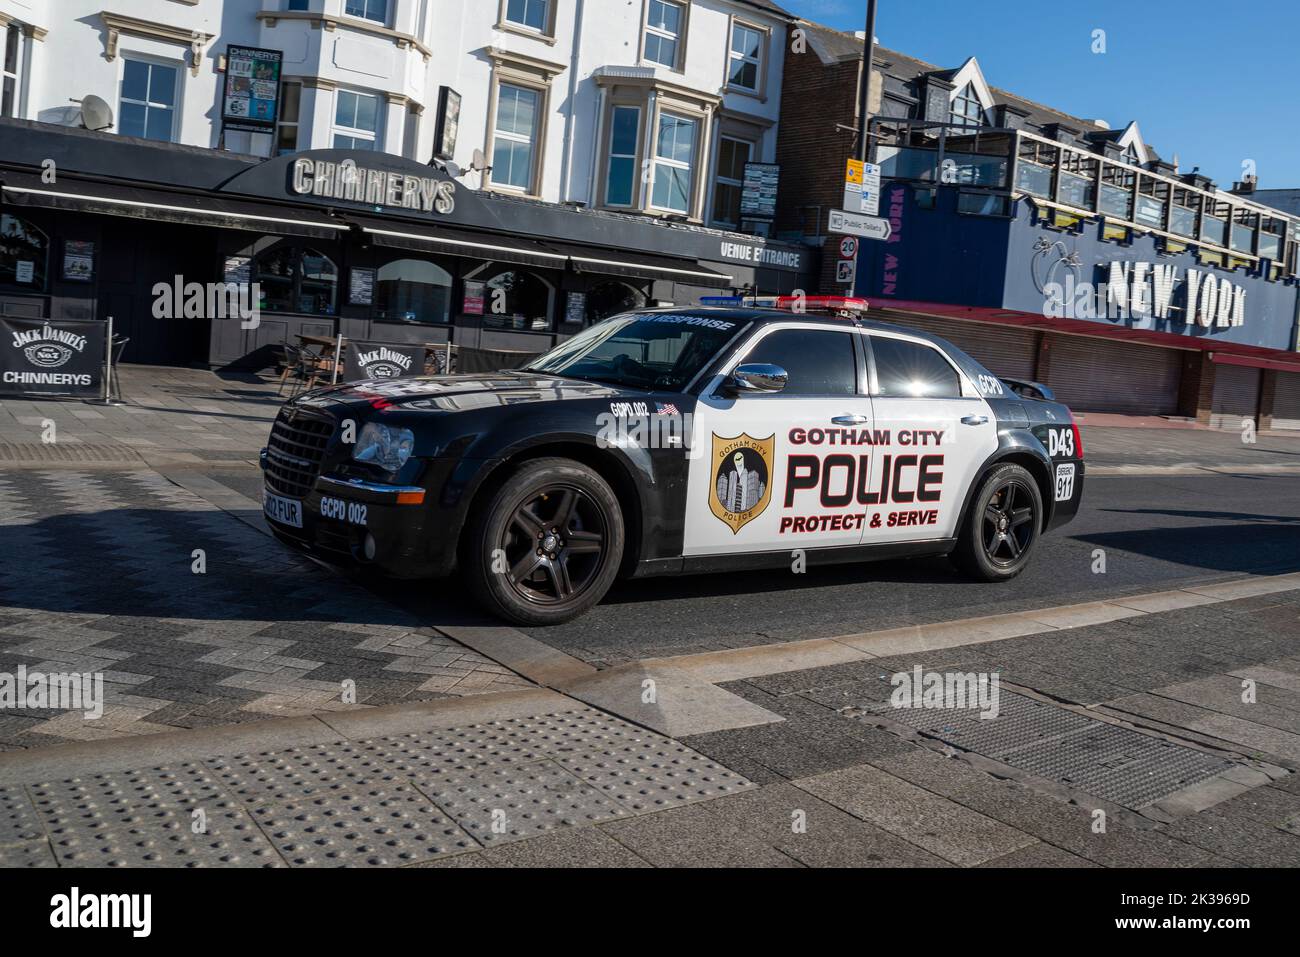 Gotham City police car marked Chrysler 300 driving on Marine Parade in Southend on Sea, Essex, UK. Protect & serve slogan. Passing New York arcade Stock Photo